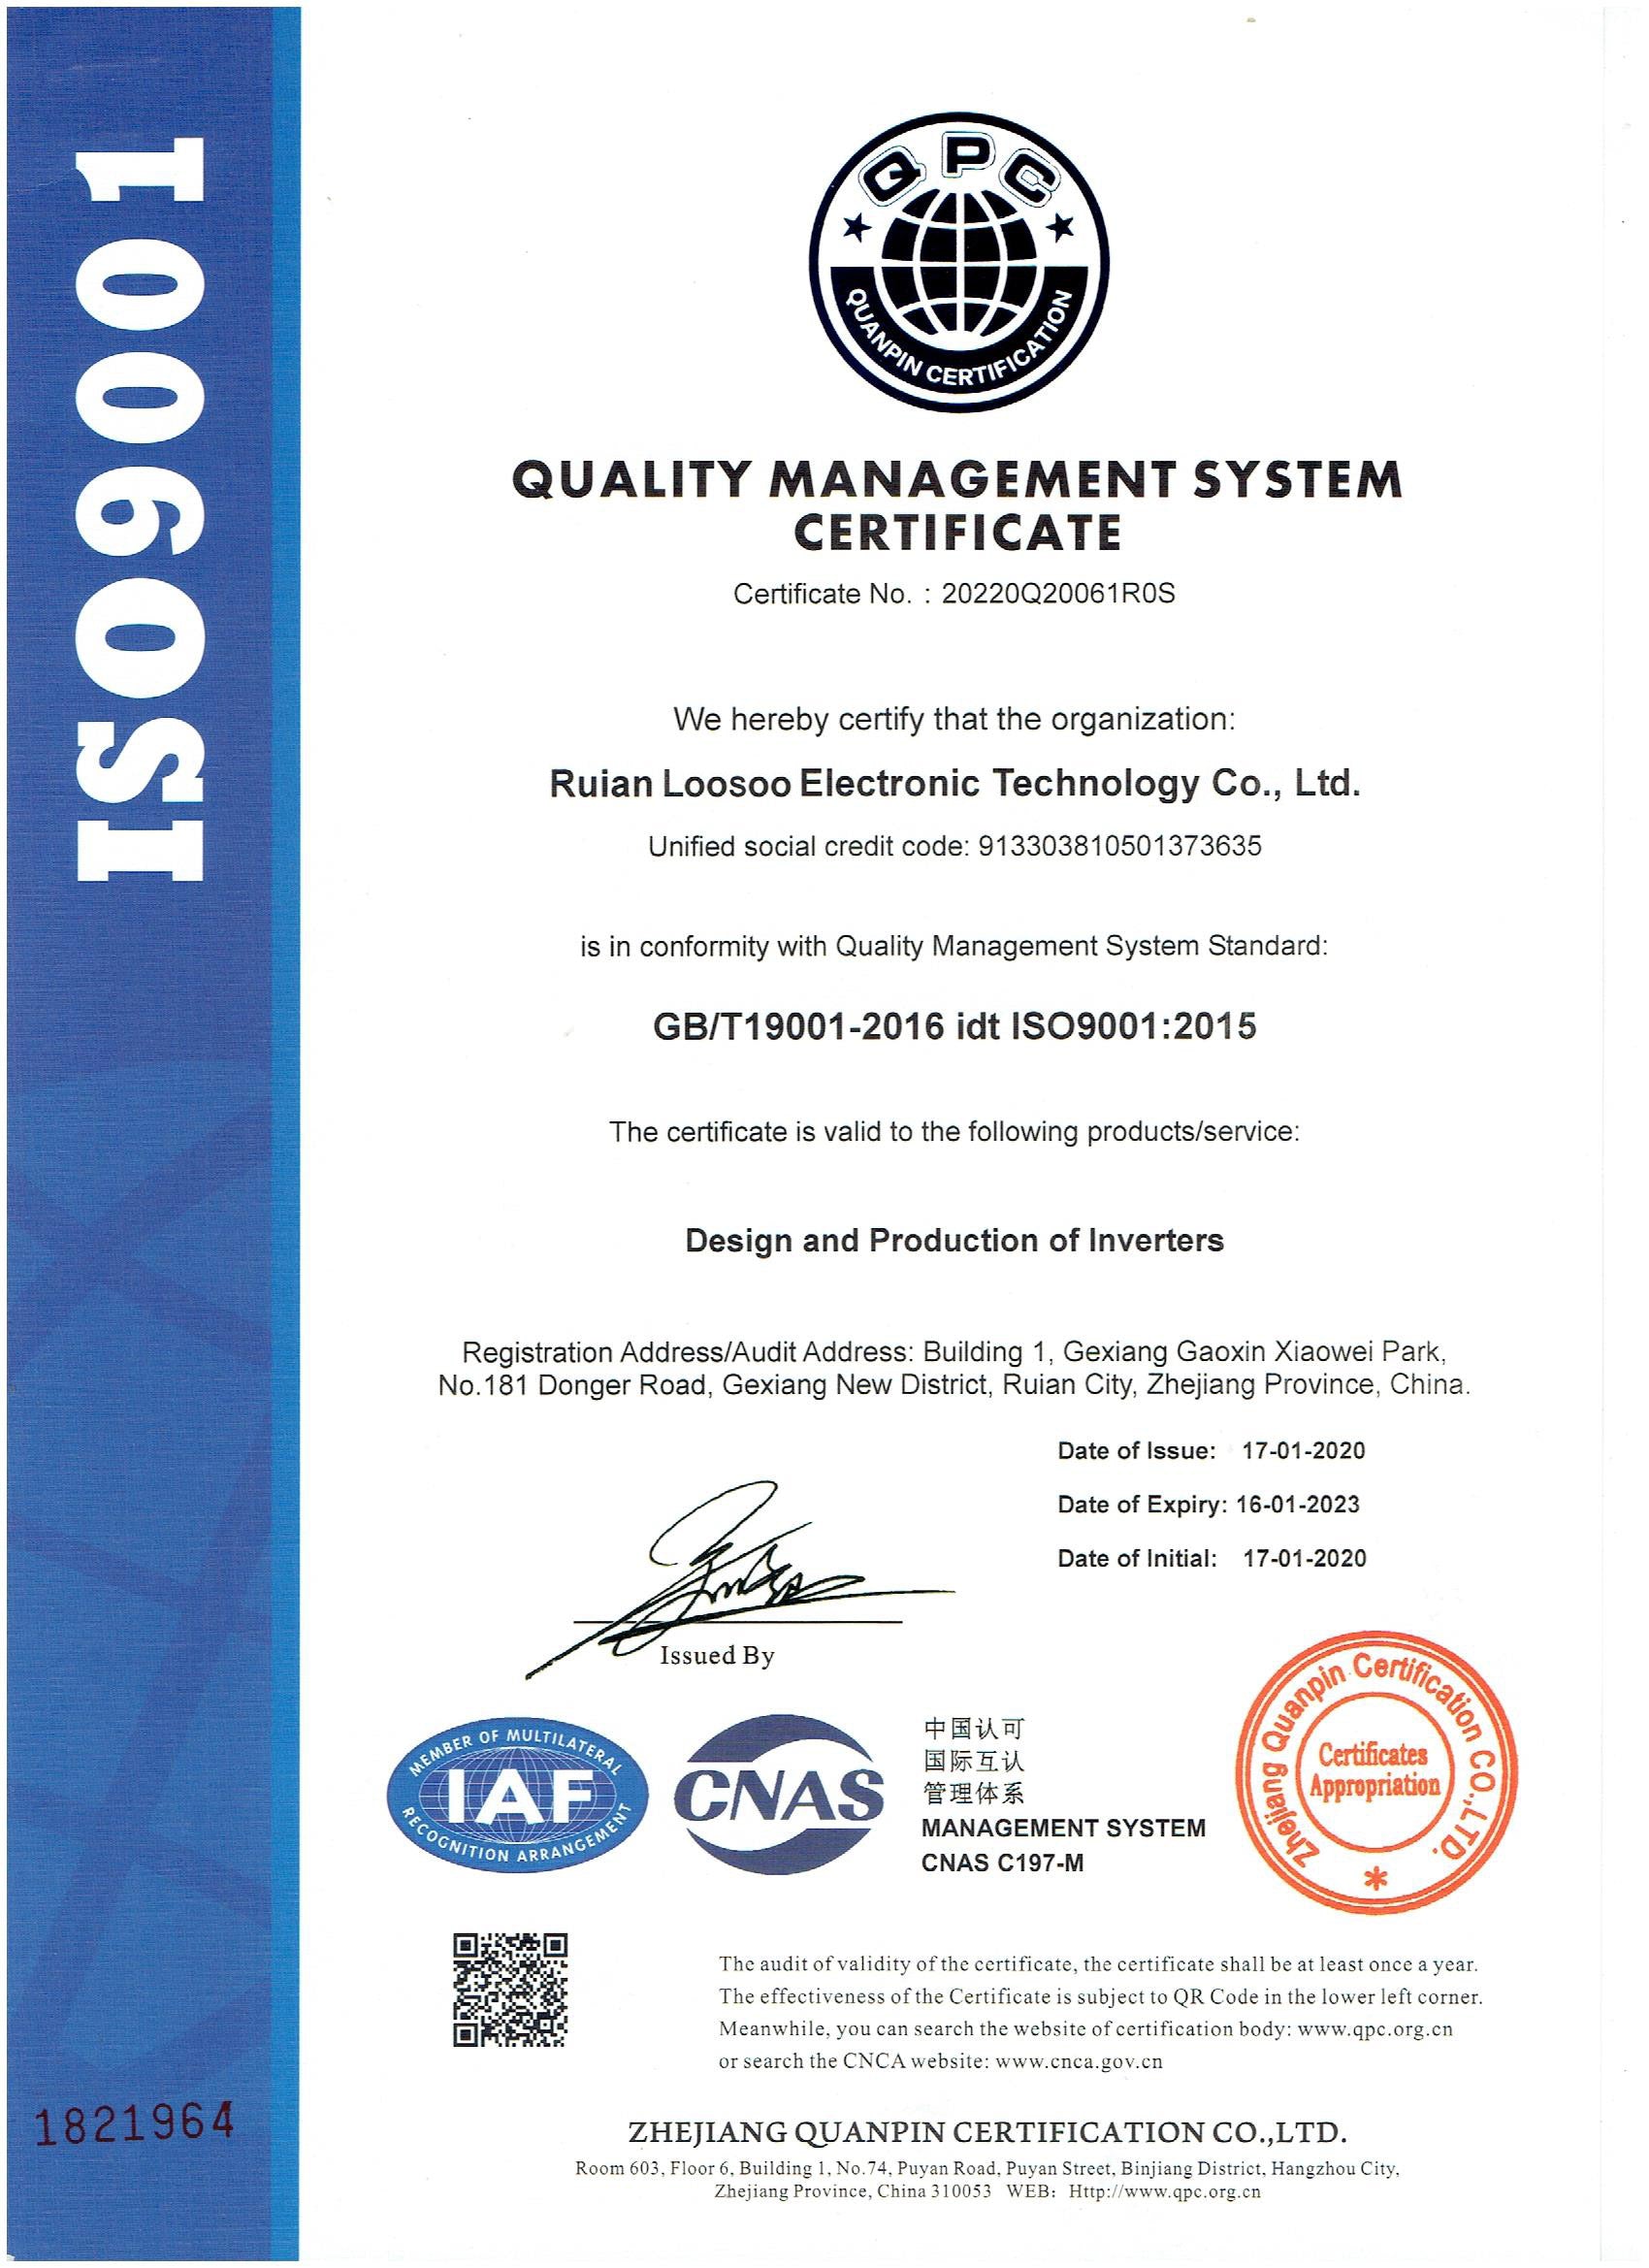 Quality Guaranteed High quality suspension system is one of the most important parts in a vehicle. LOOSOO always focuses on providing customers with the best parts. We have passed IATF16949 and ISO9001 international quality management systems and provide a 12-month warranty from the time of order.